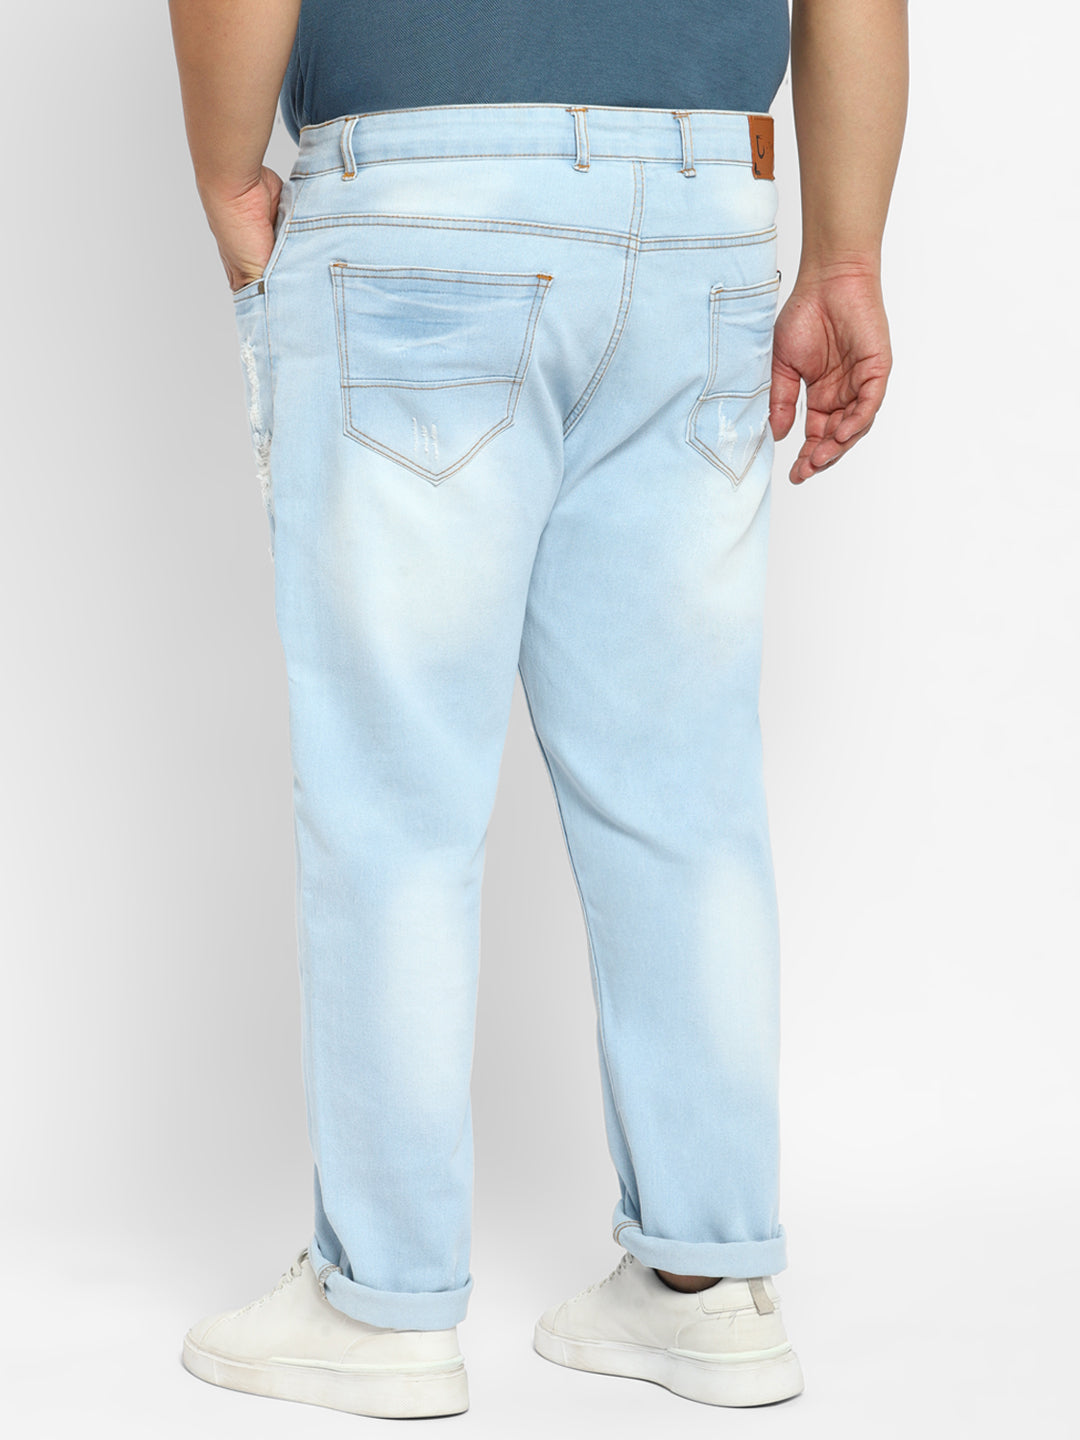 Men's Ice Blue Regular Fit Heavy Distressed/Torn Jeans